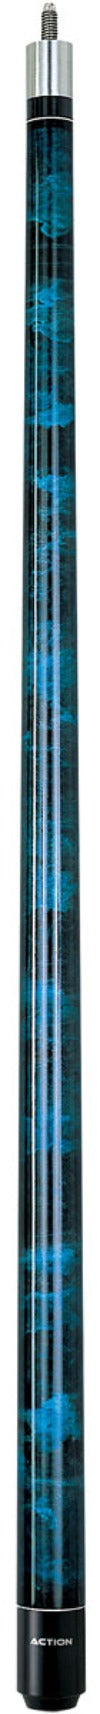 Action VAL05 Pool Cue